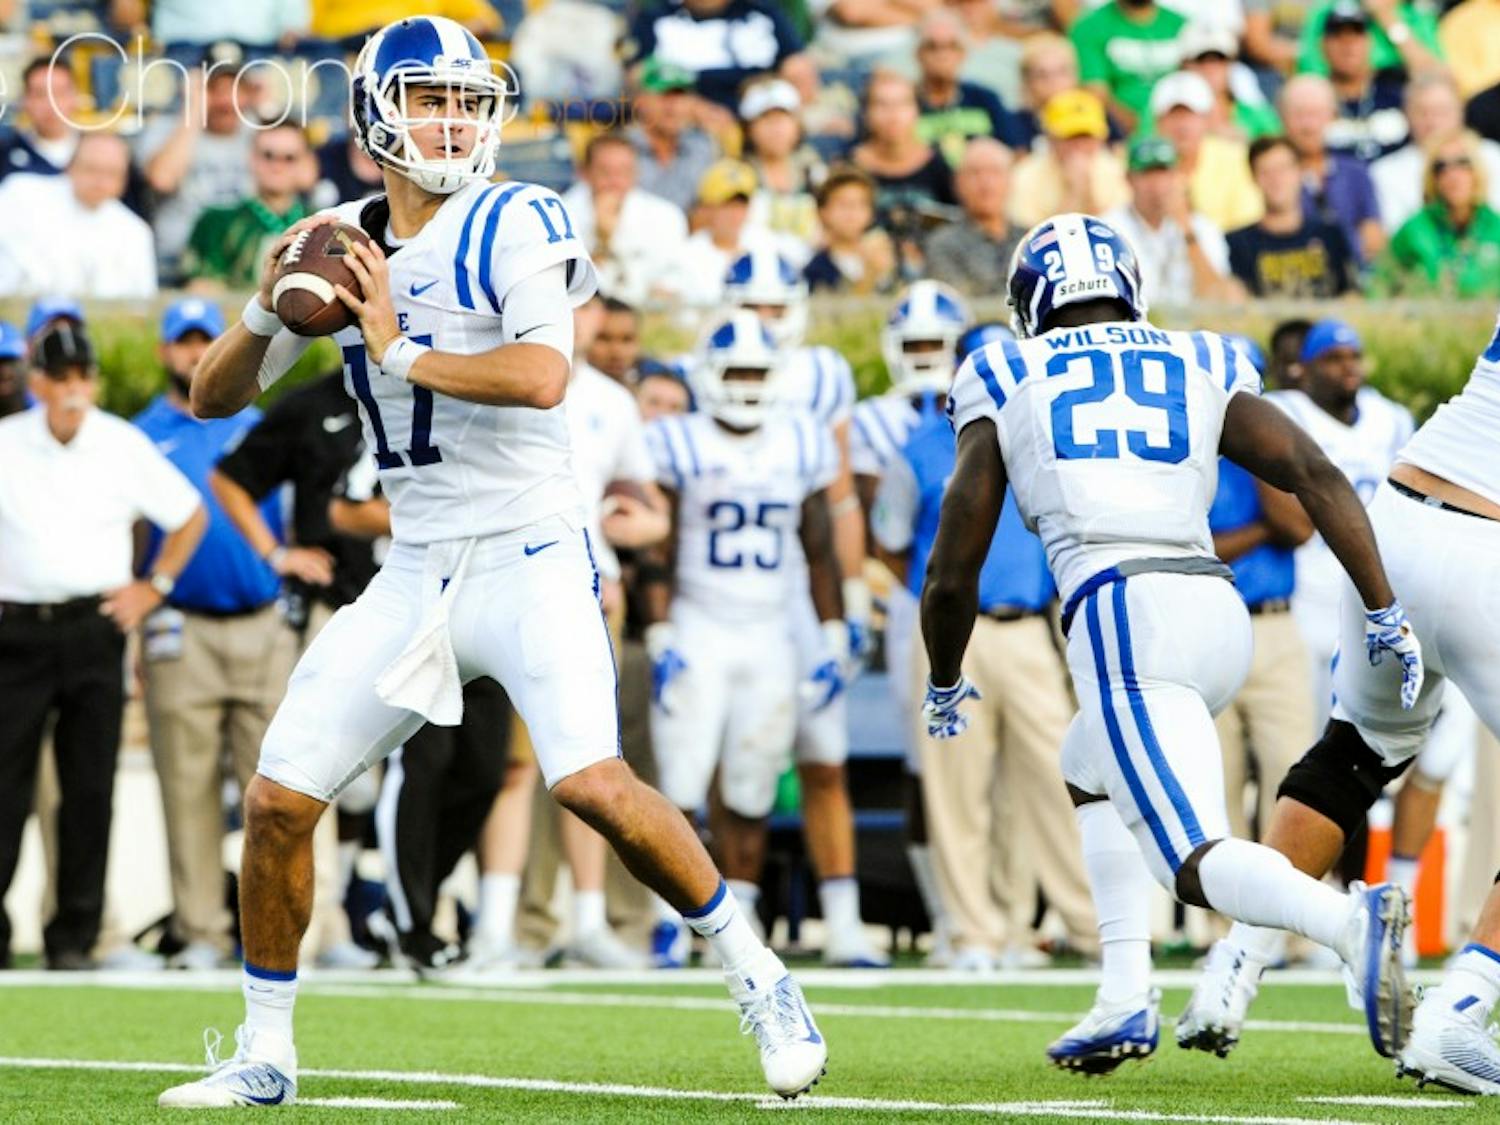 Daniel Jones had the best game of his young career against Notre Dame, throwing three touchdown passes in Duke's 38-35 upset win.